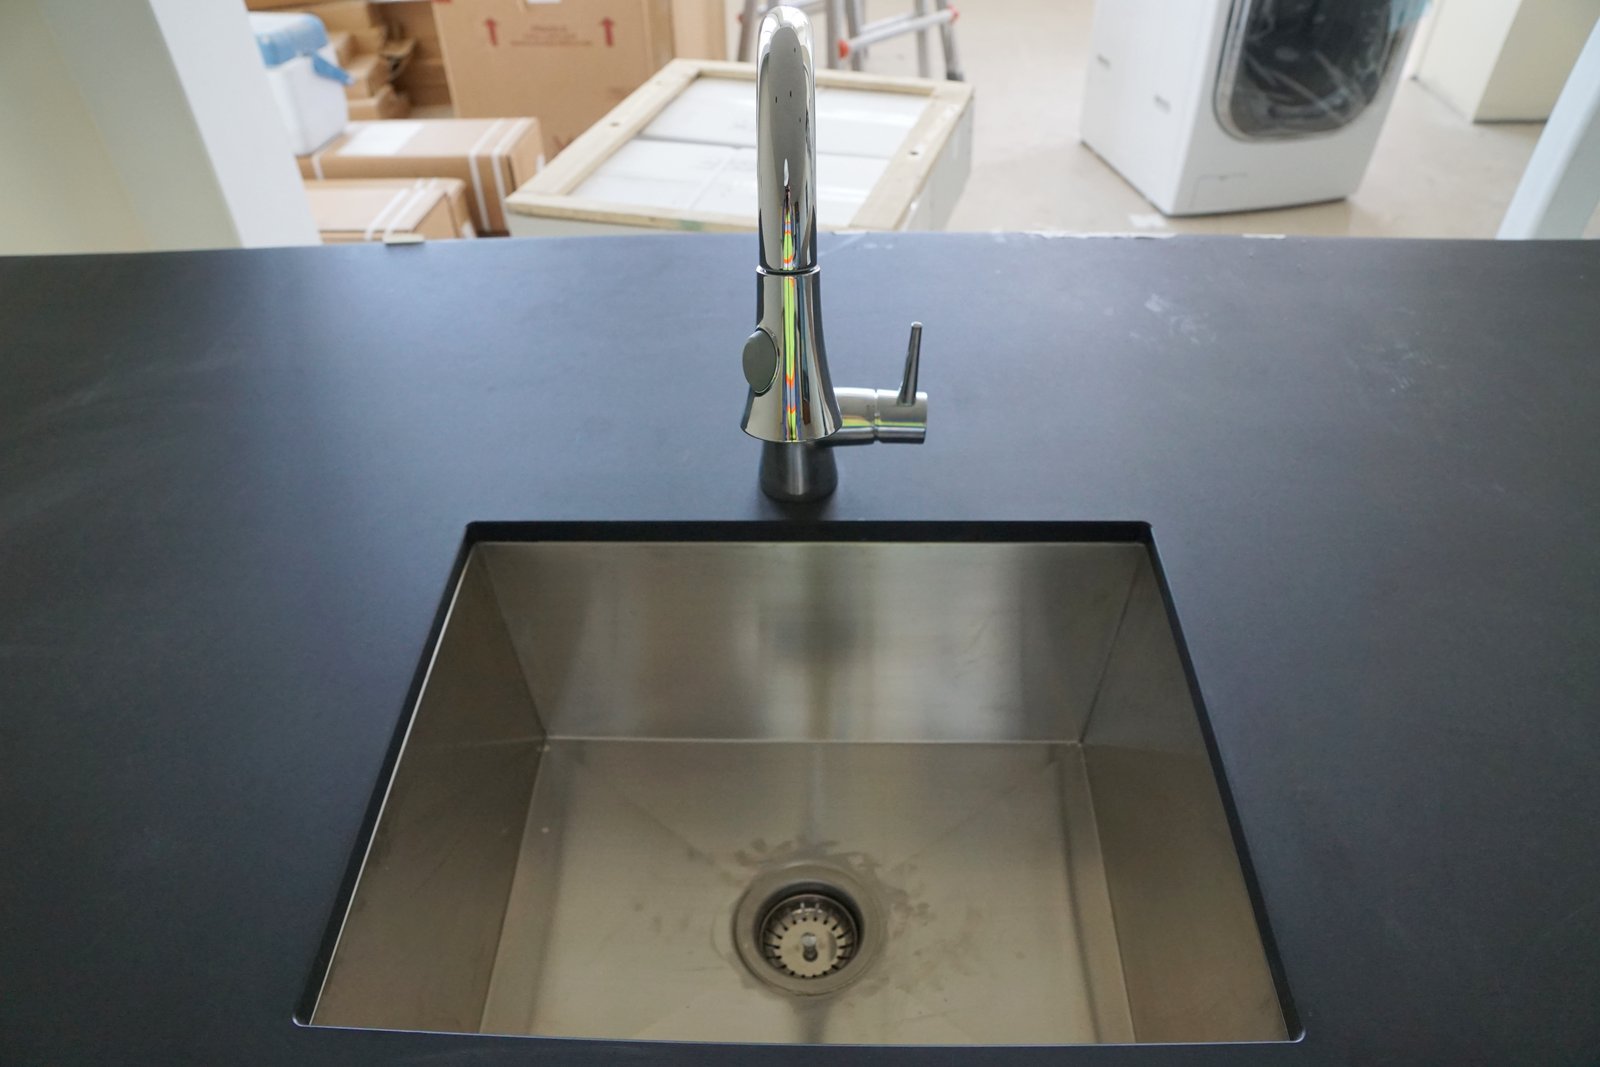 front view of kitchen sink